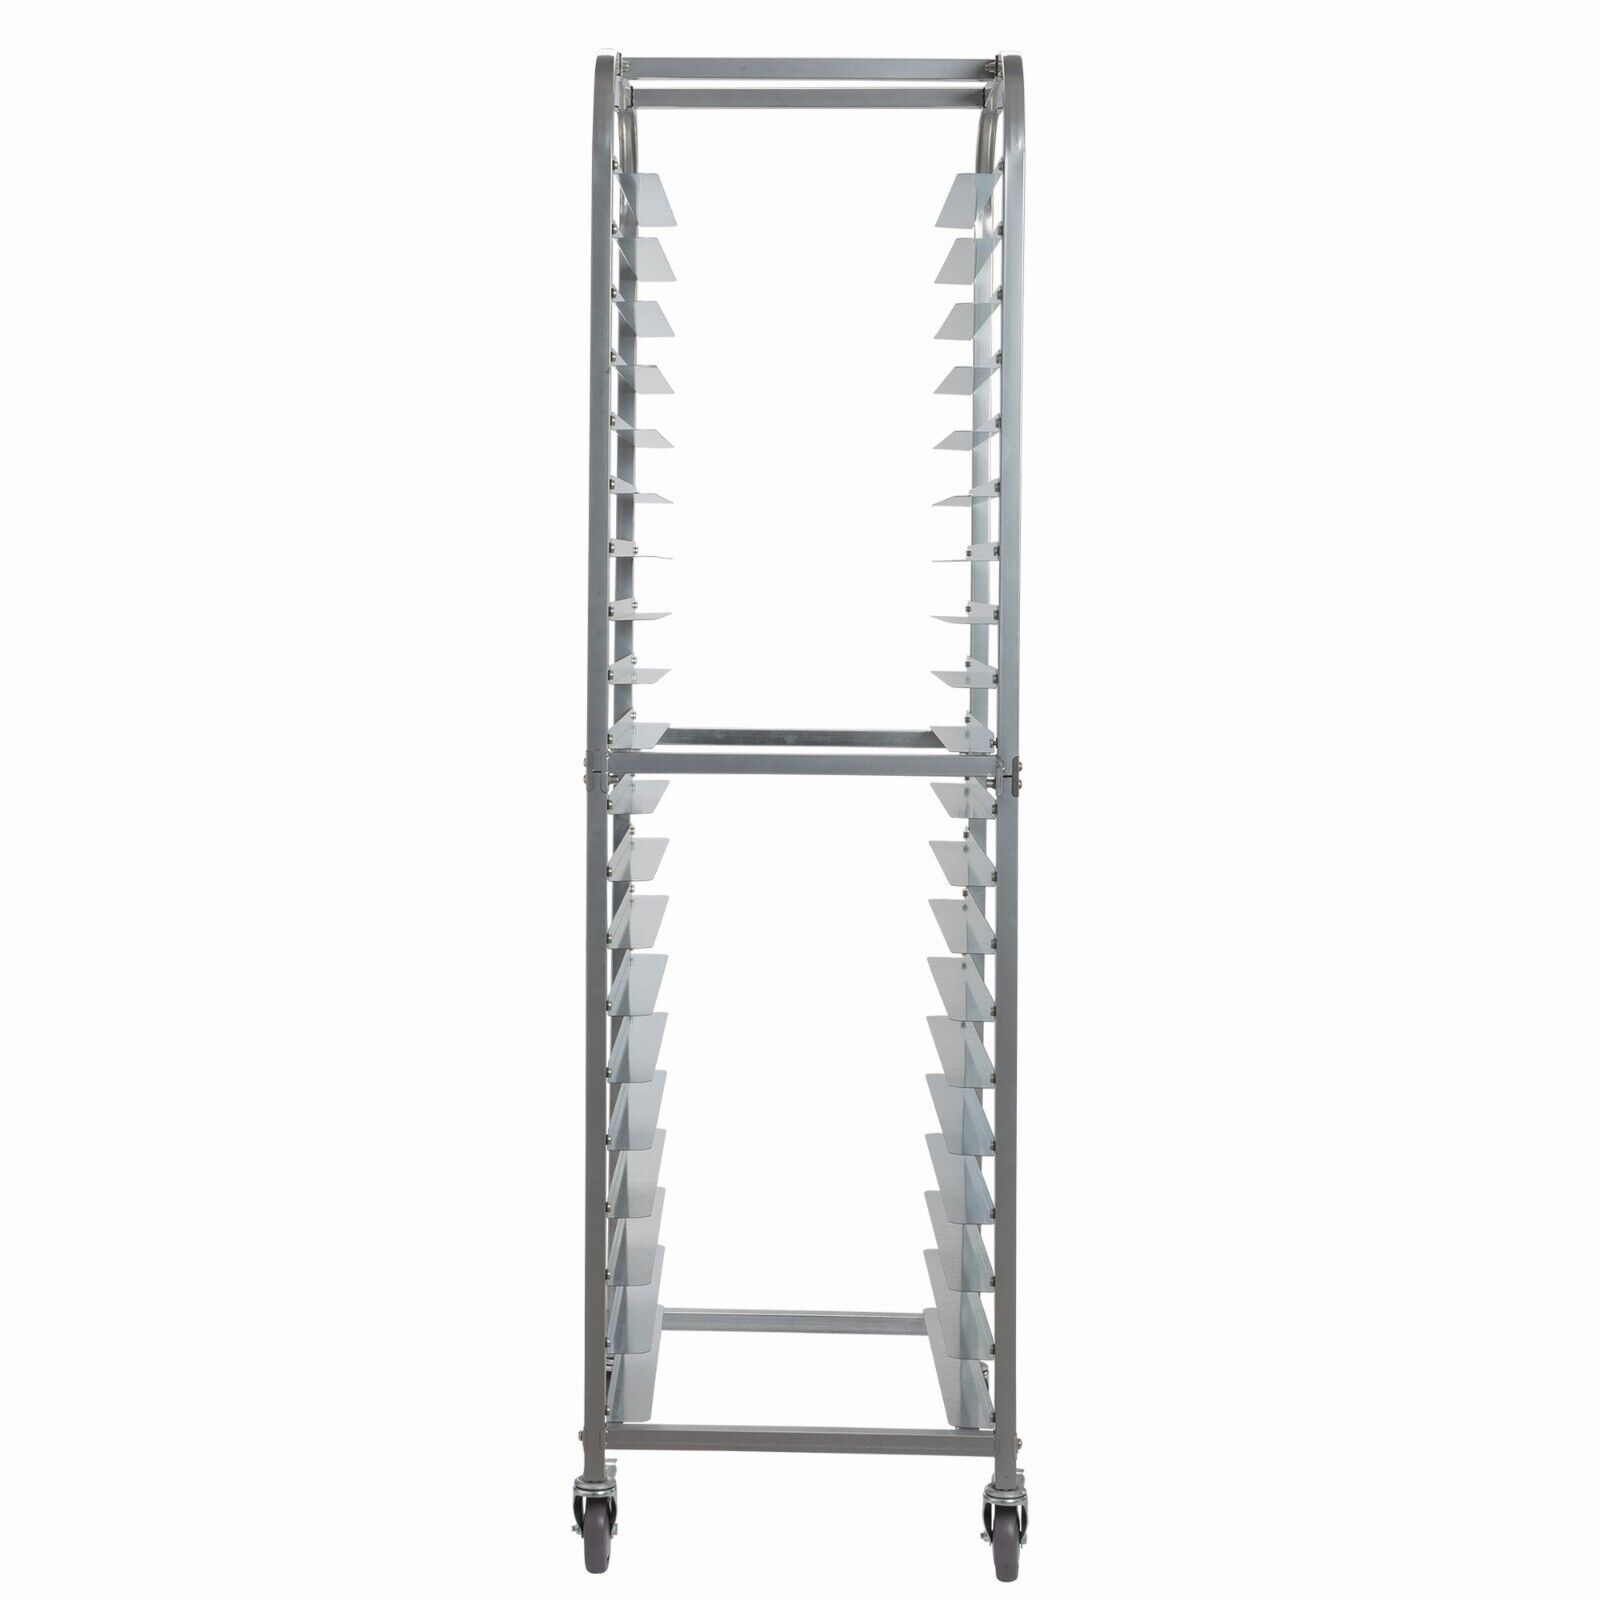 20-Tier Bun Pan Bakery Rack with 4 Wheels for Kitchen Bakery Restaurant Catering